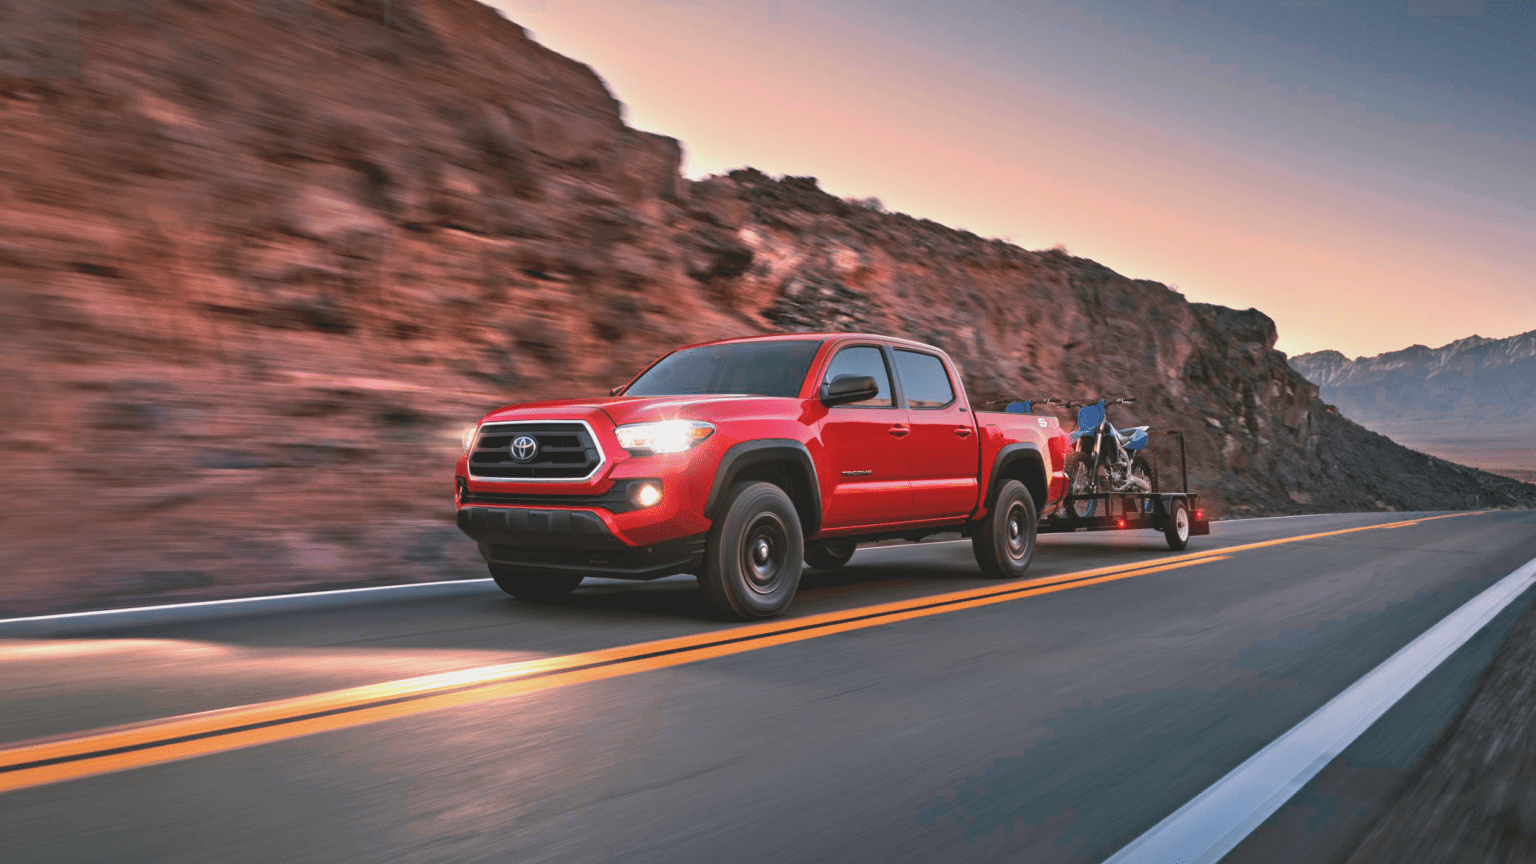 Toyota Towing Capacity How Much Can It Handle?